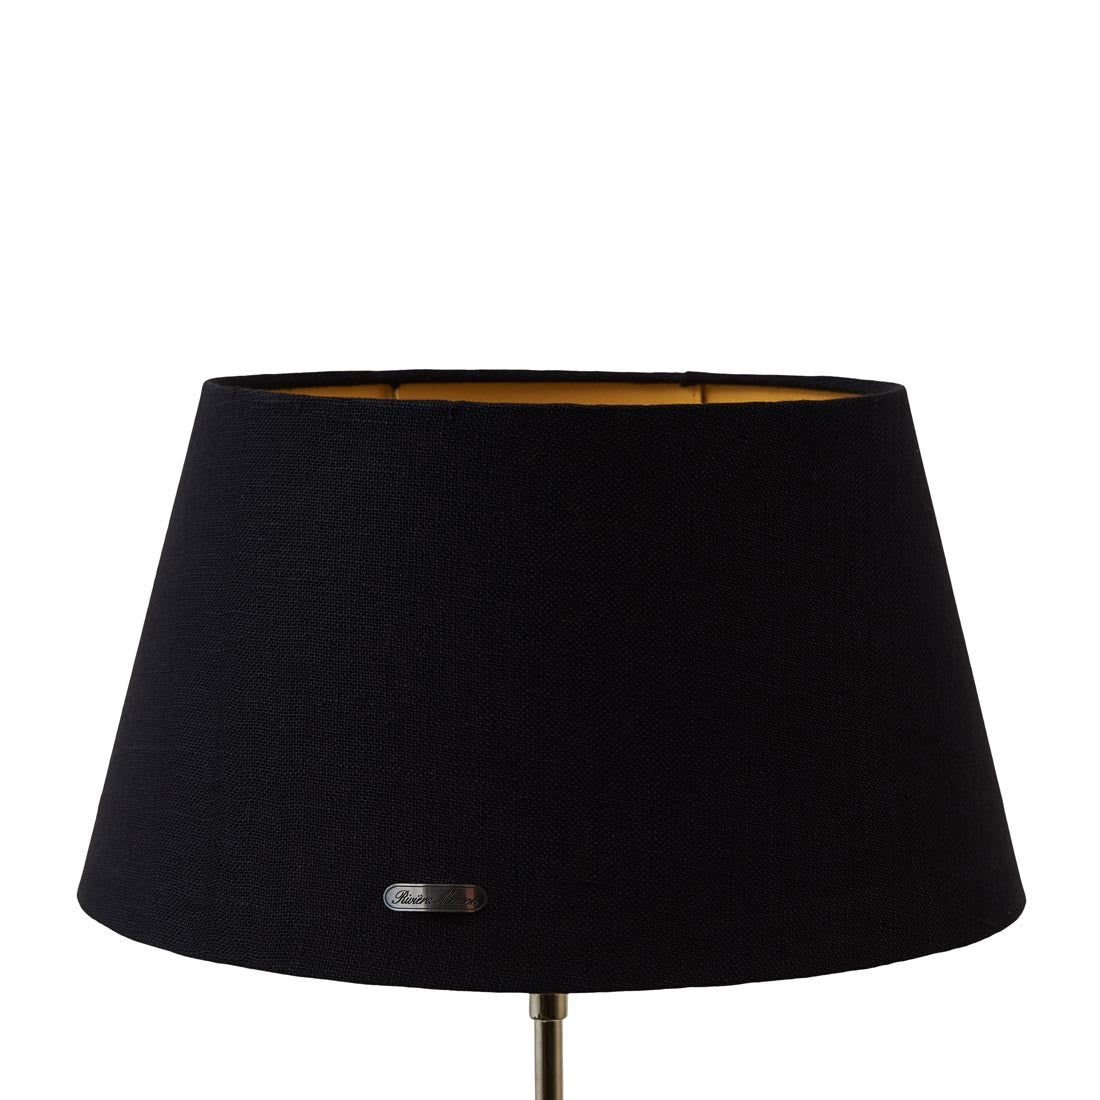 Chic Lampshade bl/gld 28x38